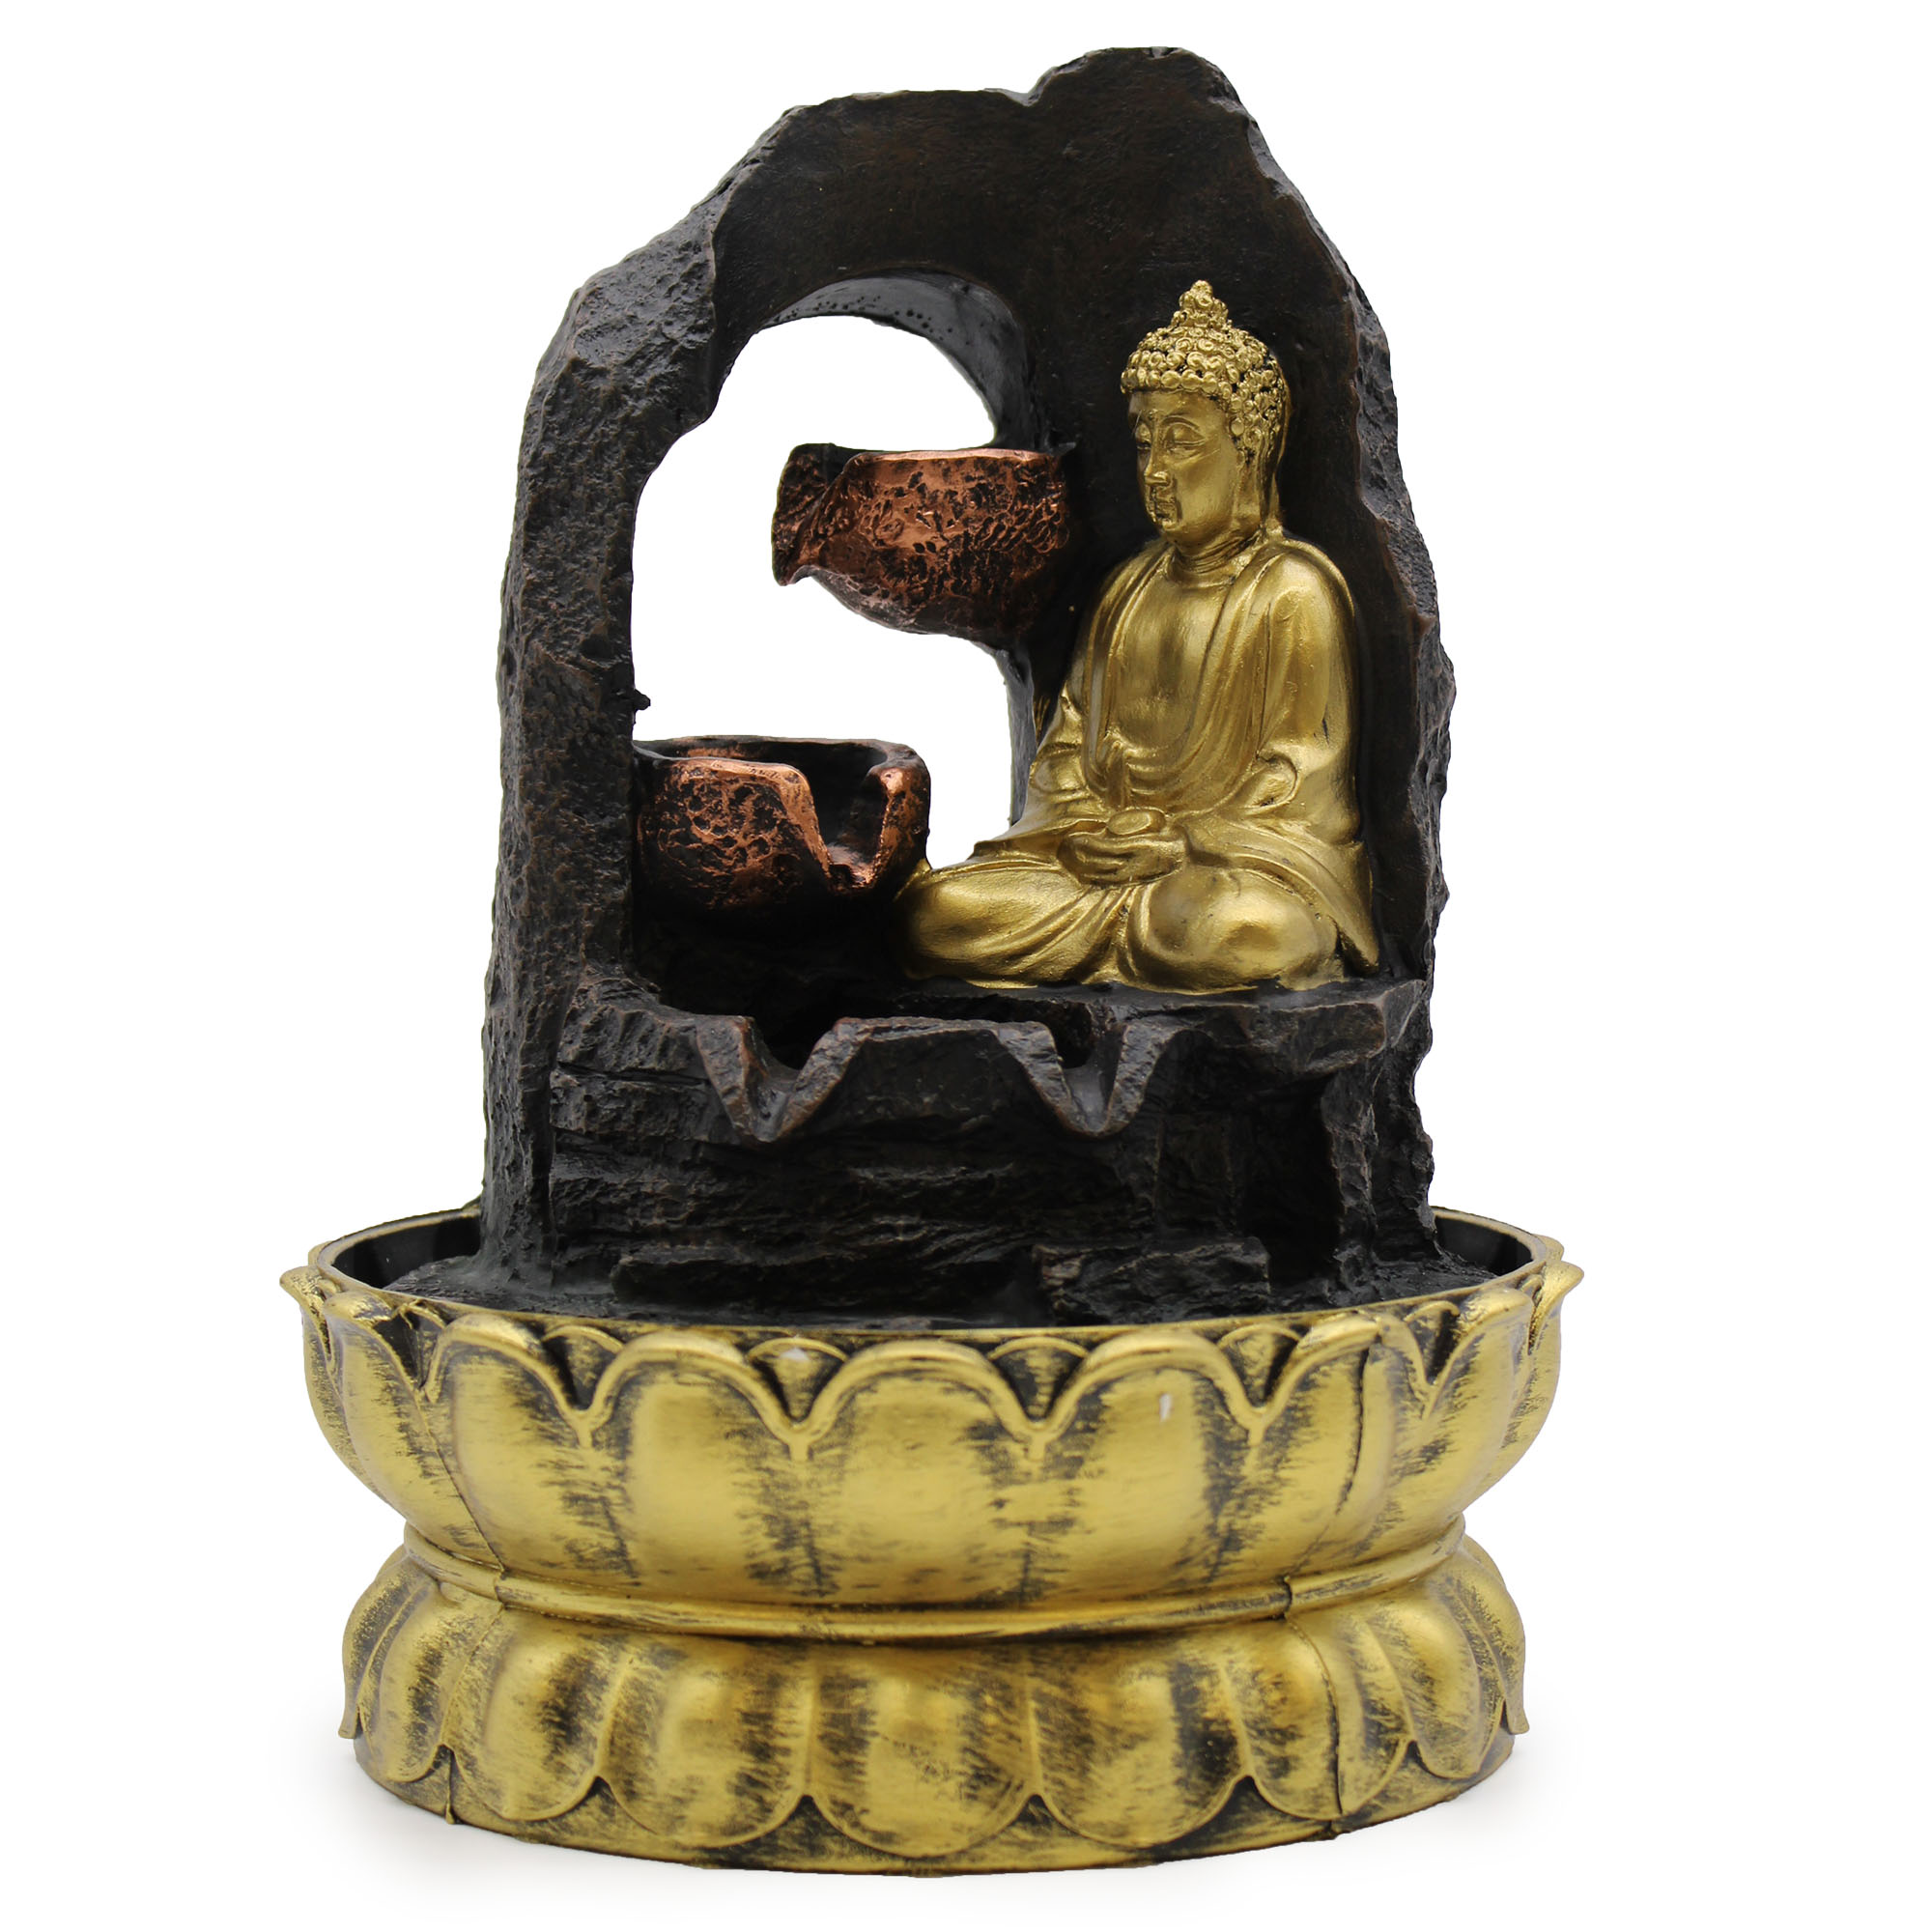 Wholesale Tabletop Water Feature - 30cm - Golden Meditating Buddha ...